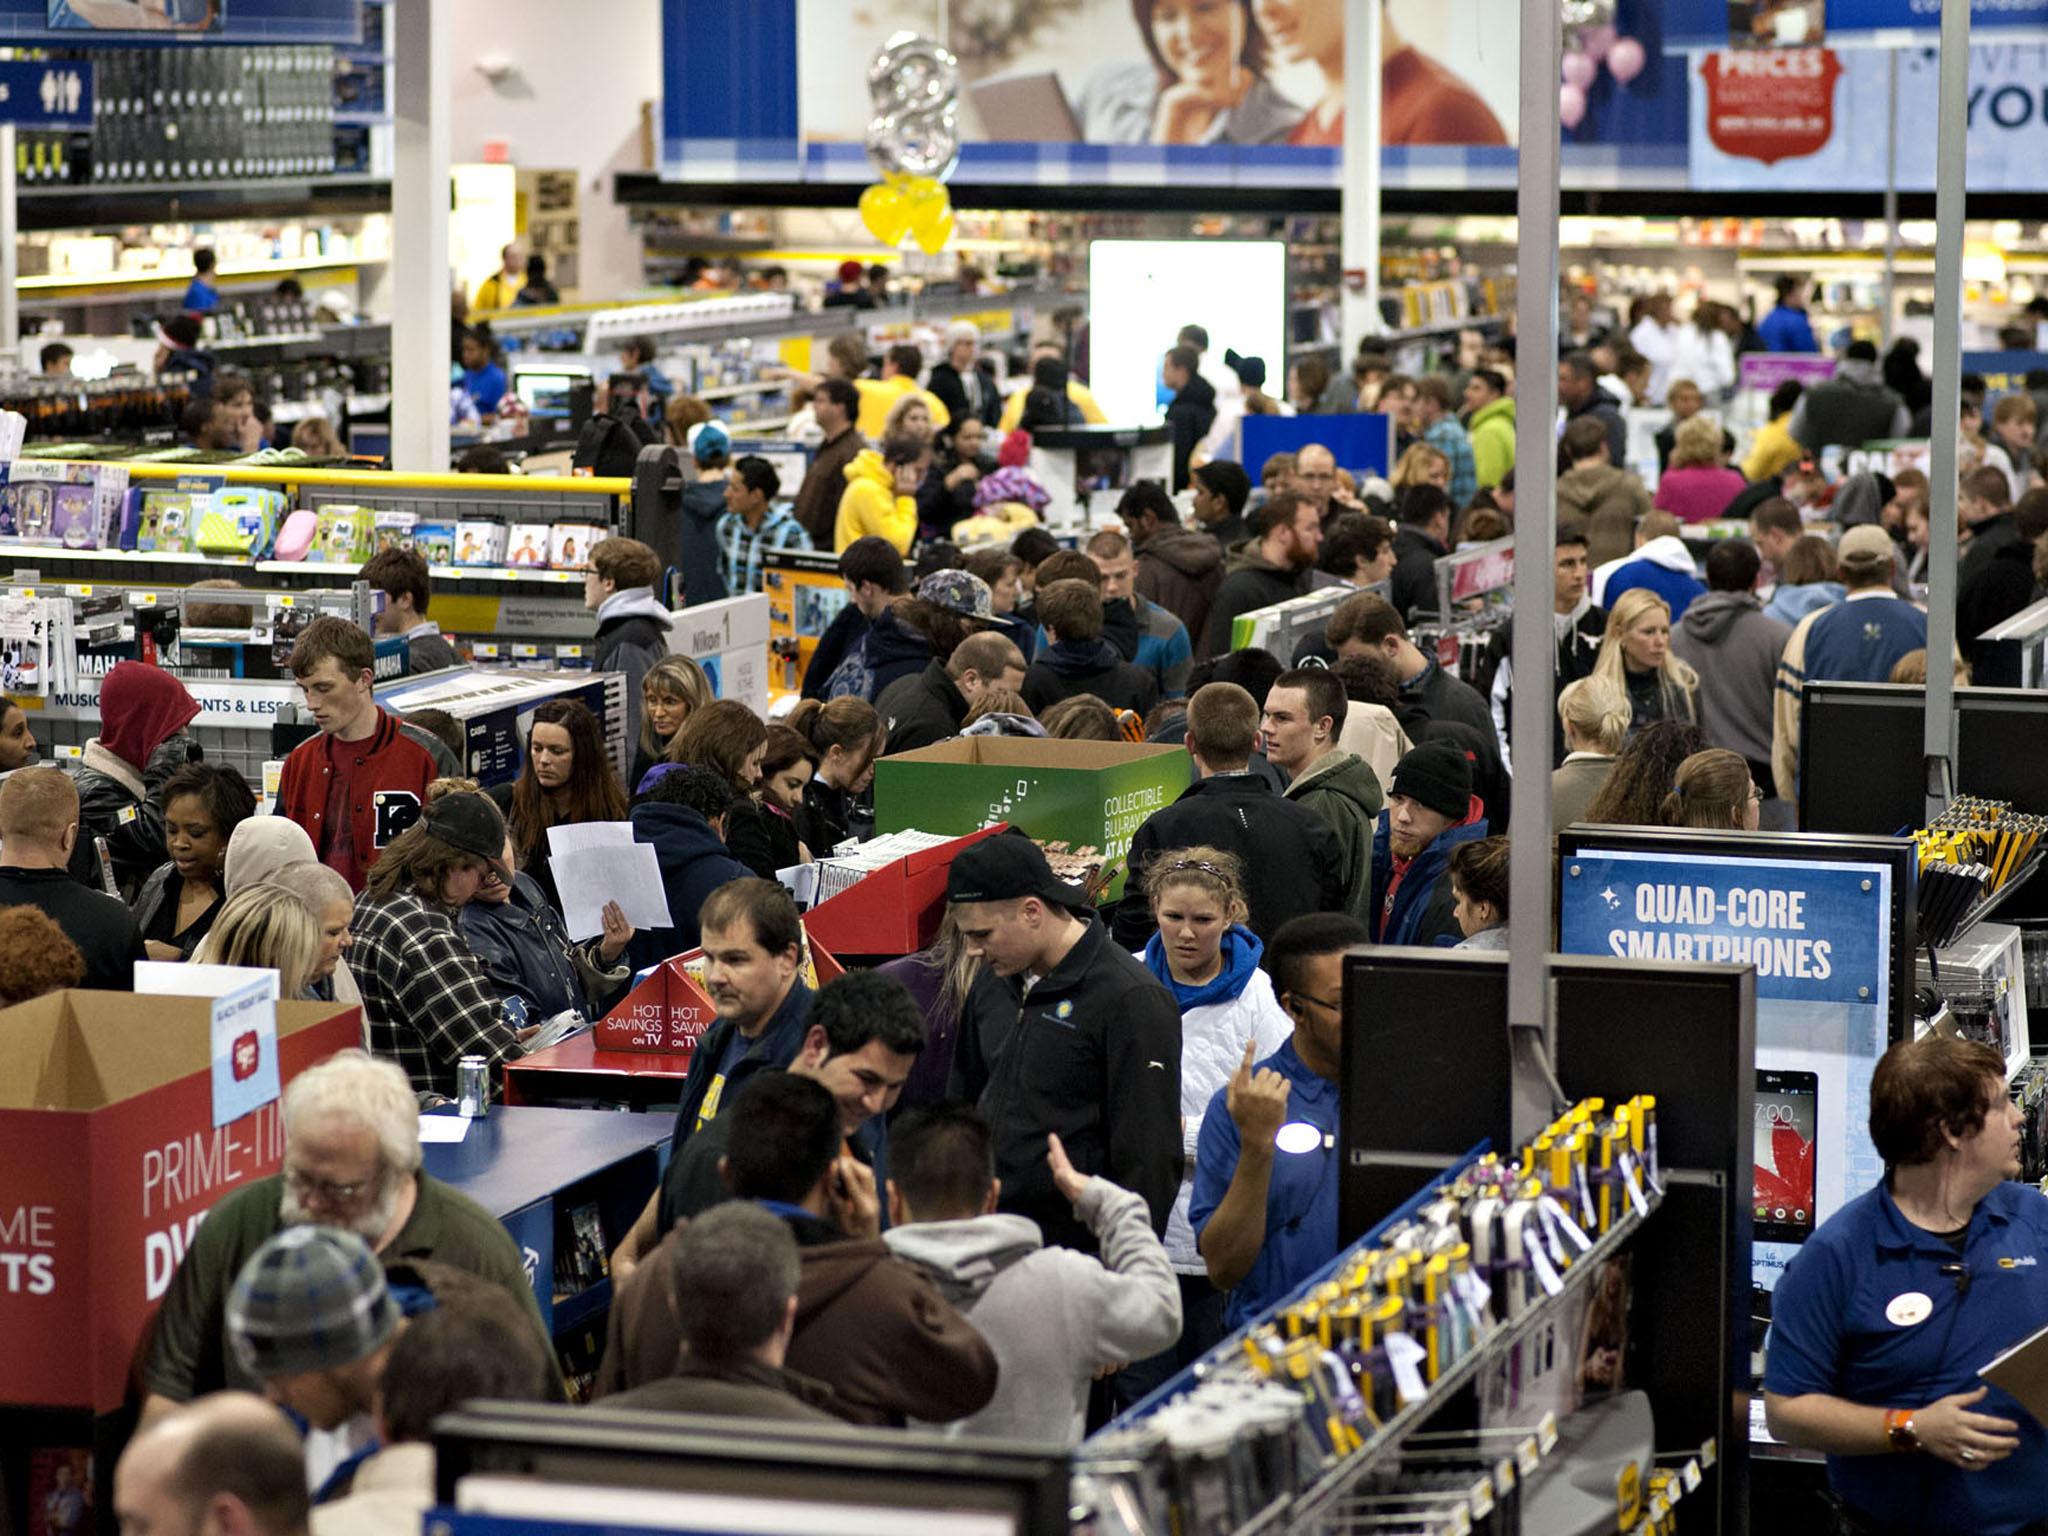 BLACK FRIDAY: Shoppers browse inside a Best Buy Co. store in Peoria, Illinois